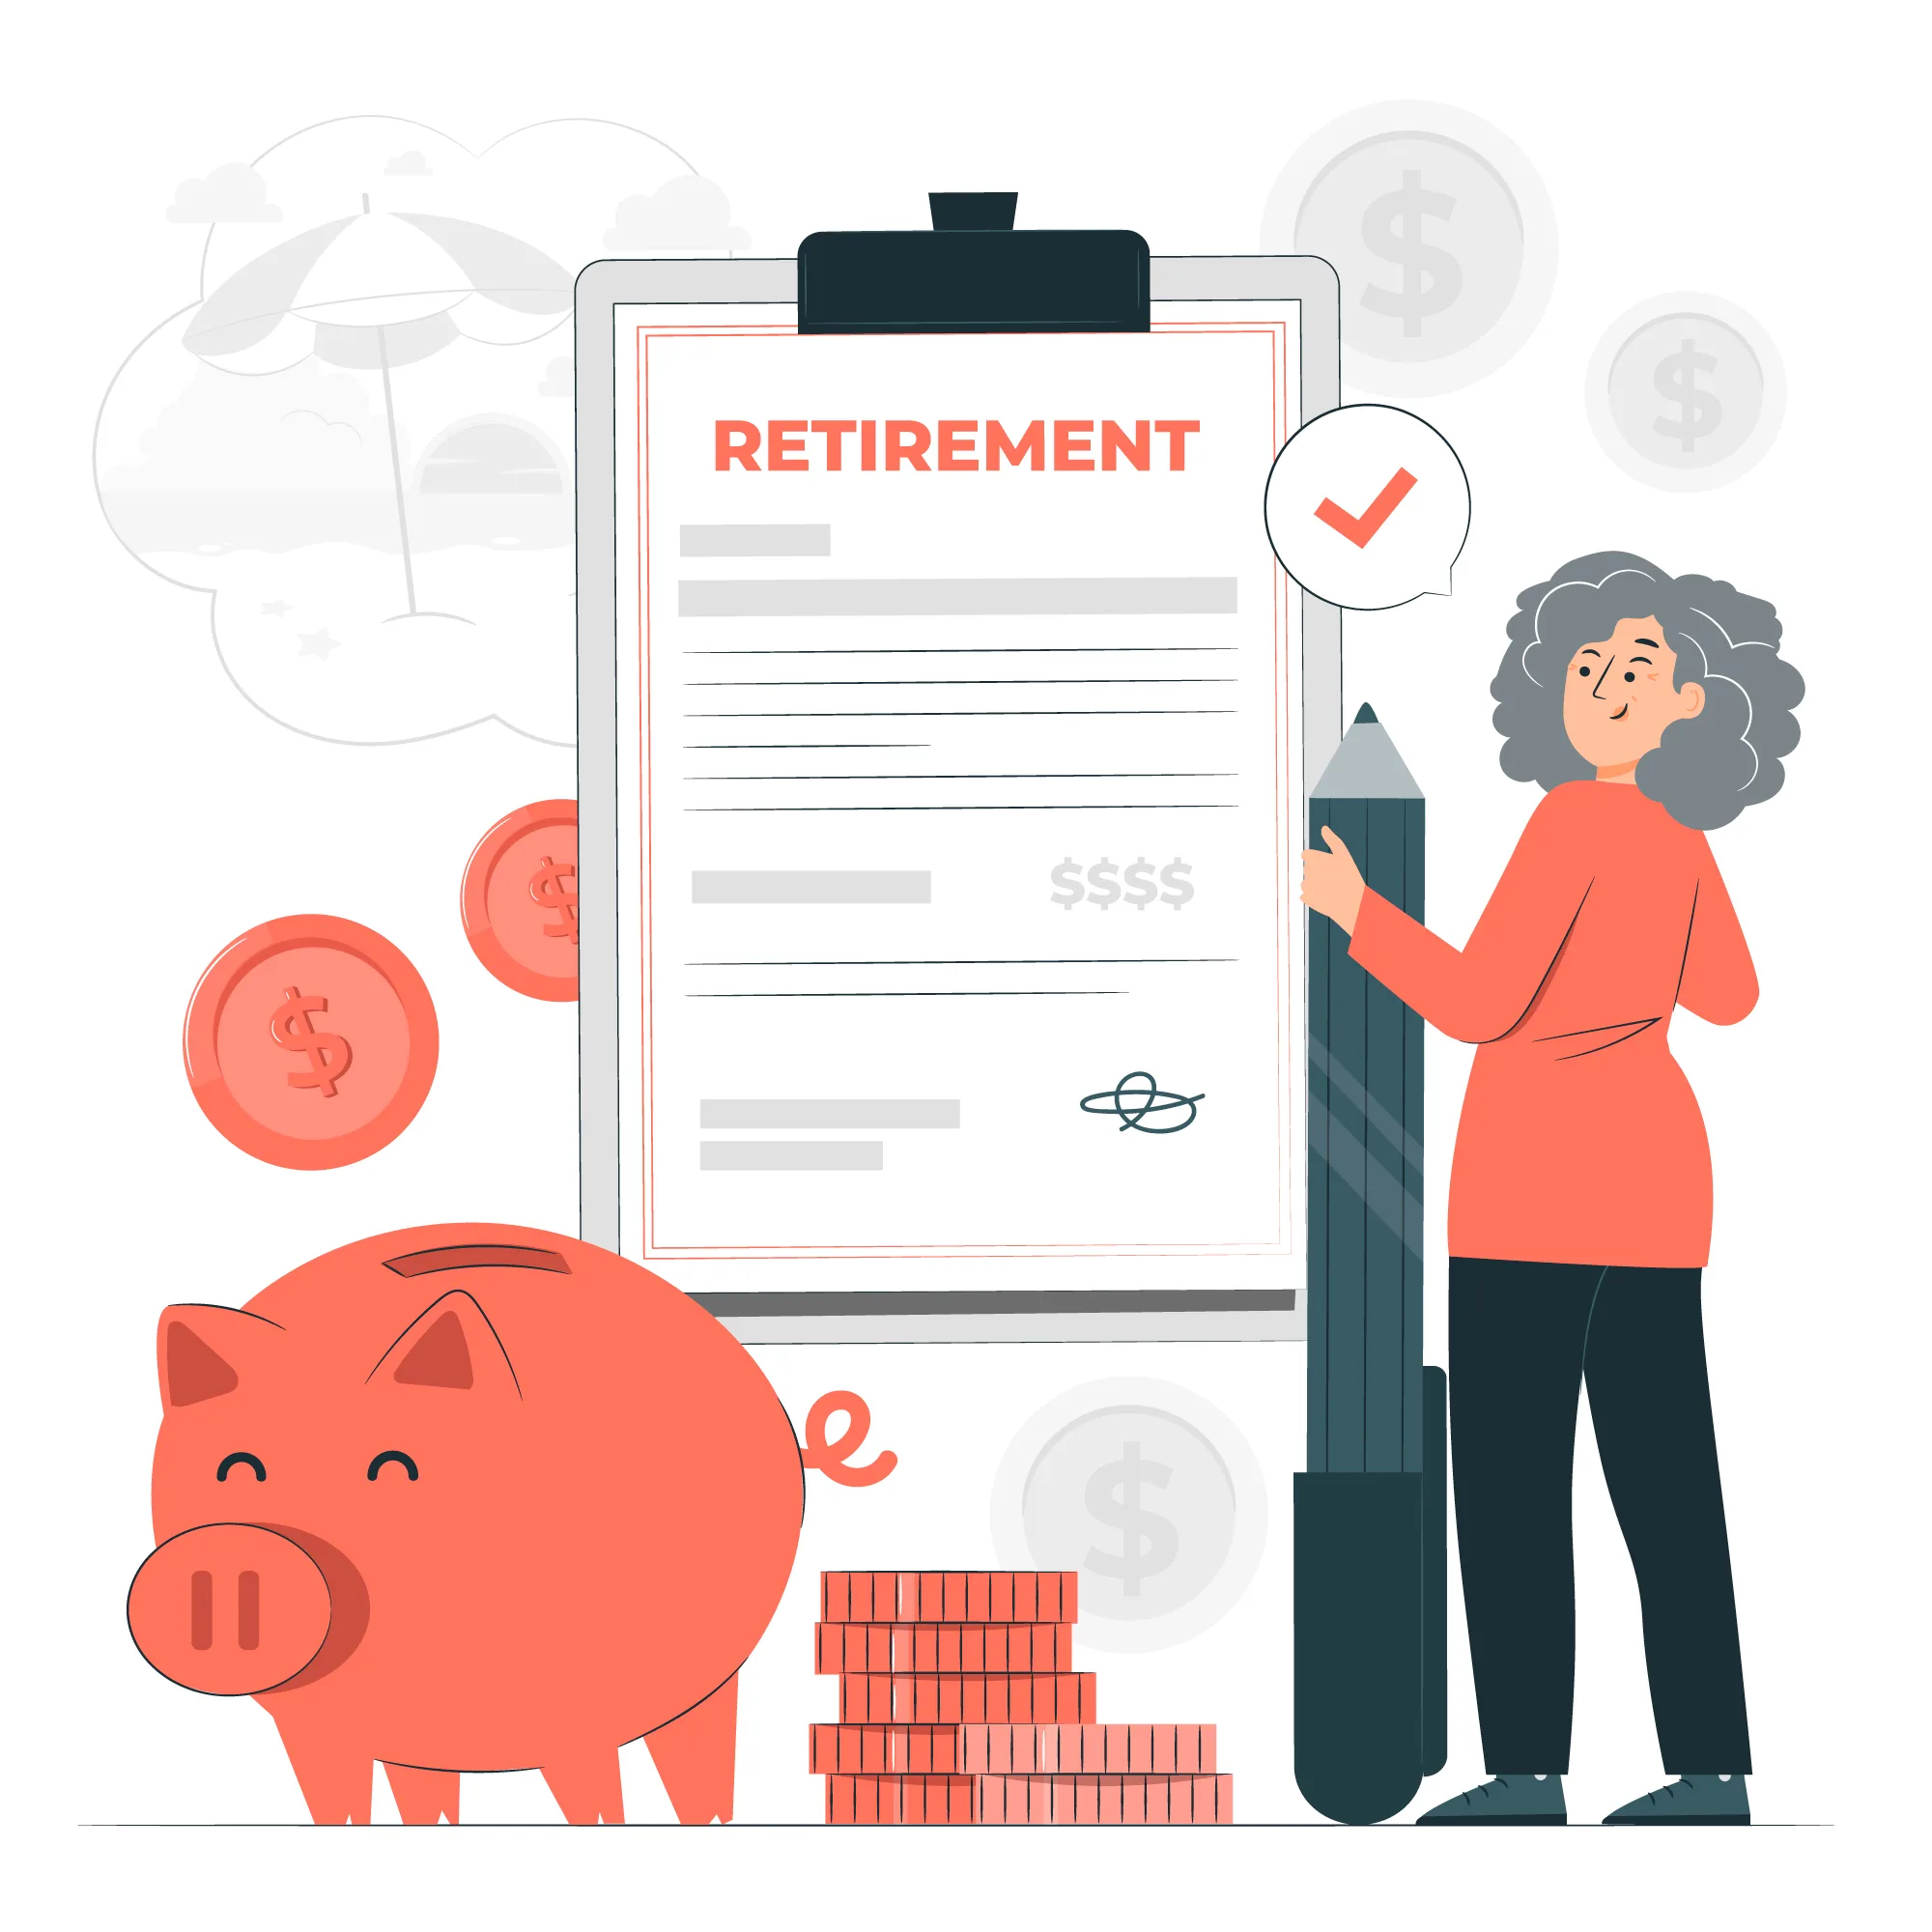 FPSB Retirement and Tax Planning Specialist Guide: Road Map